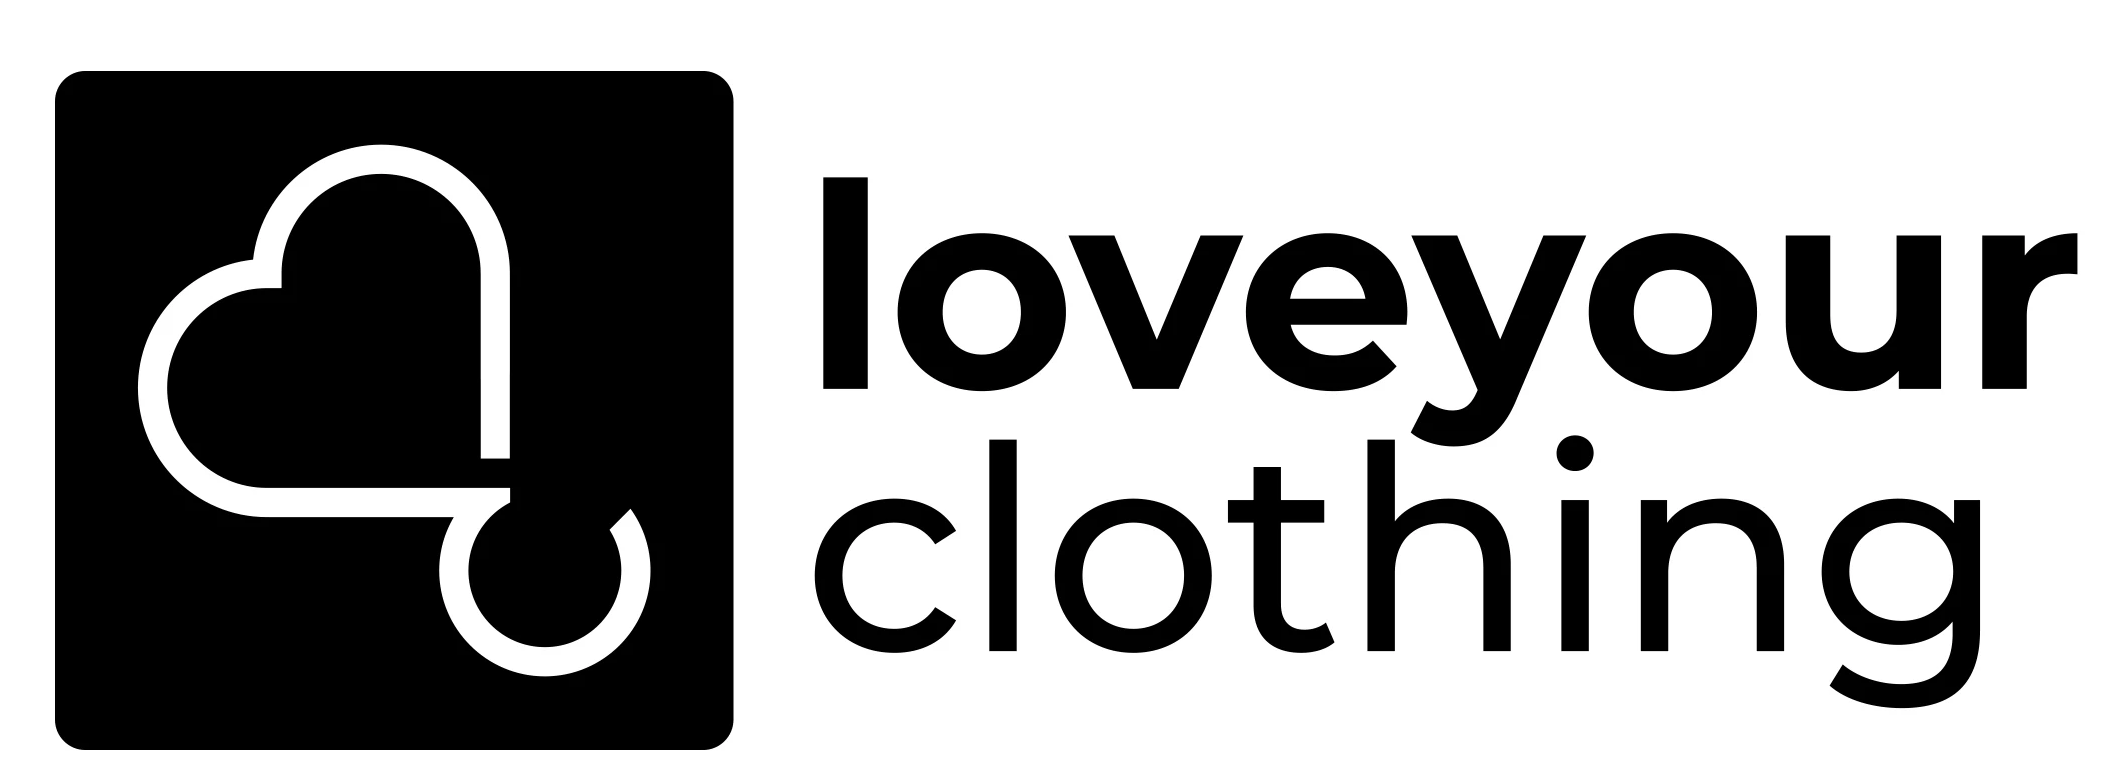 Love your clothing